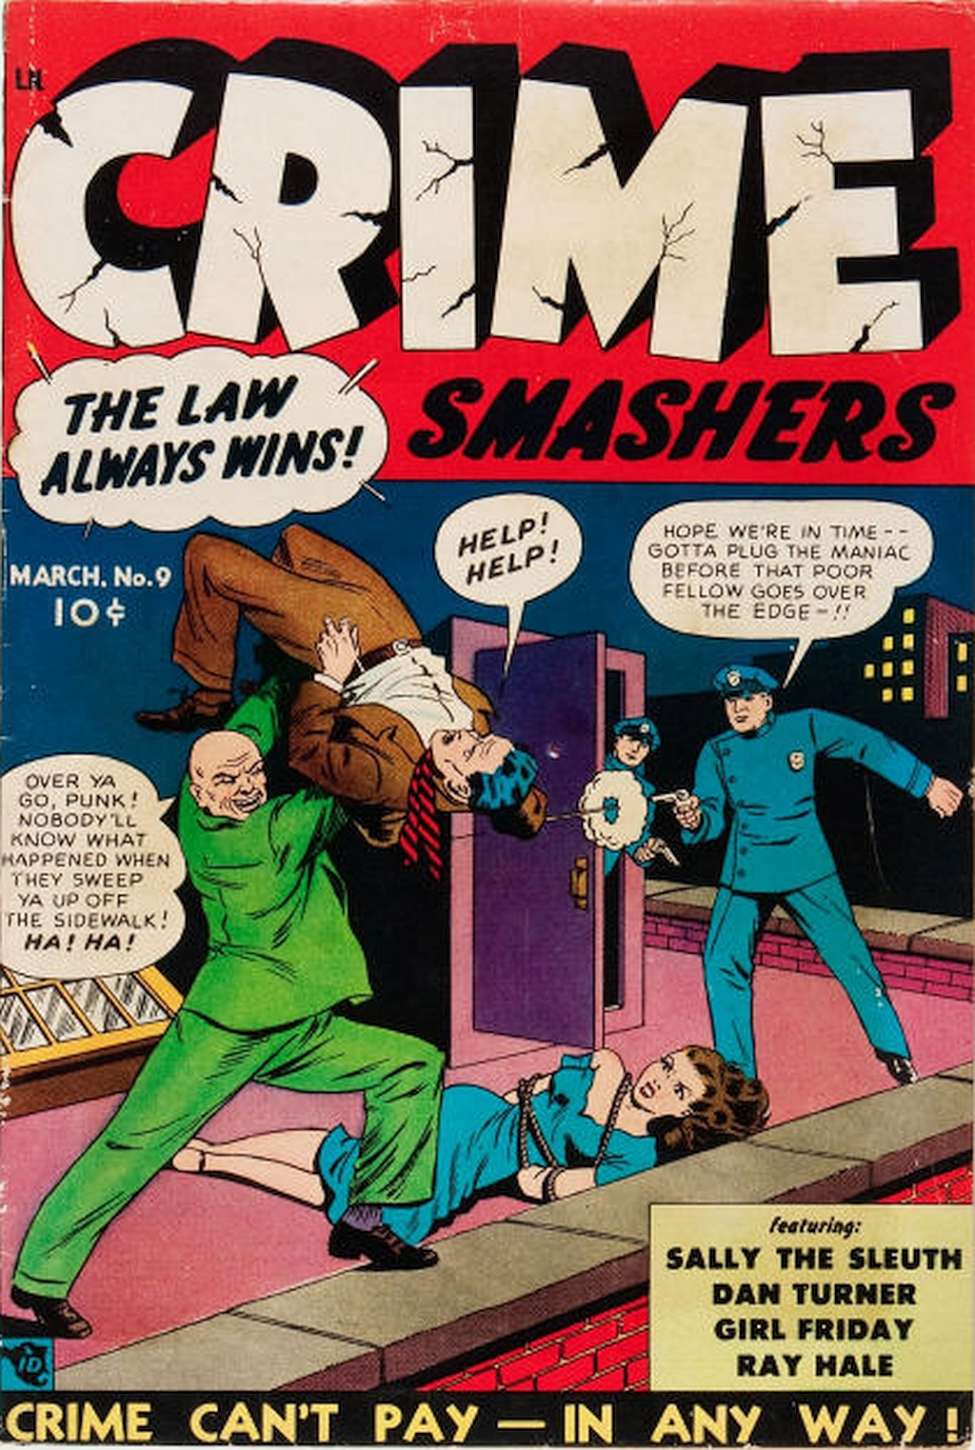 Book Cover For Crime Smashers 9